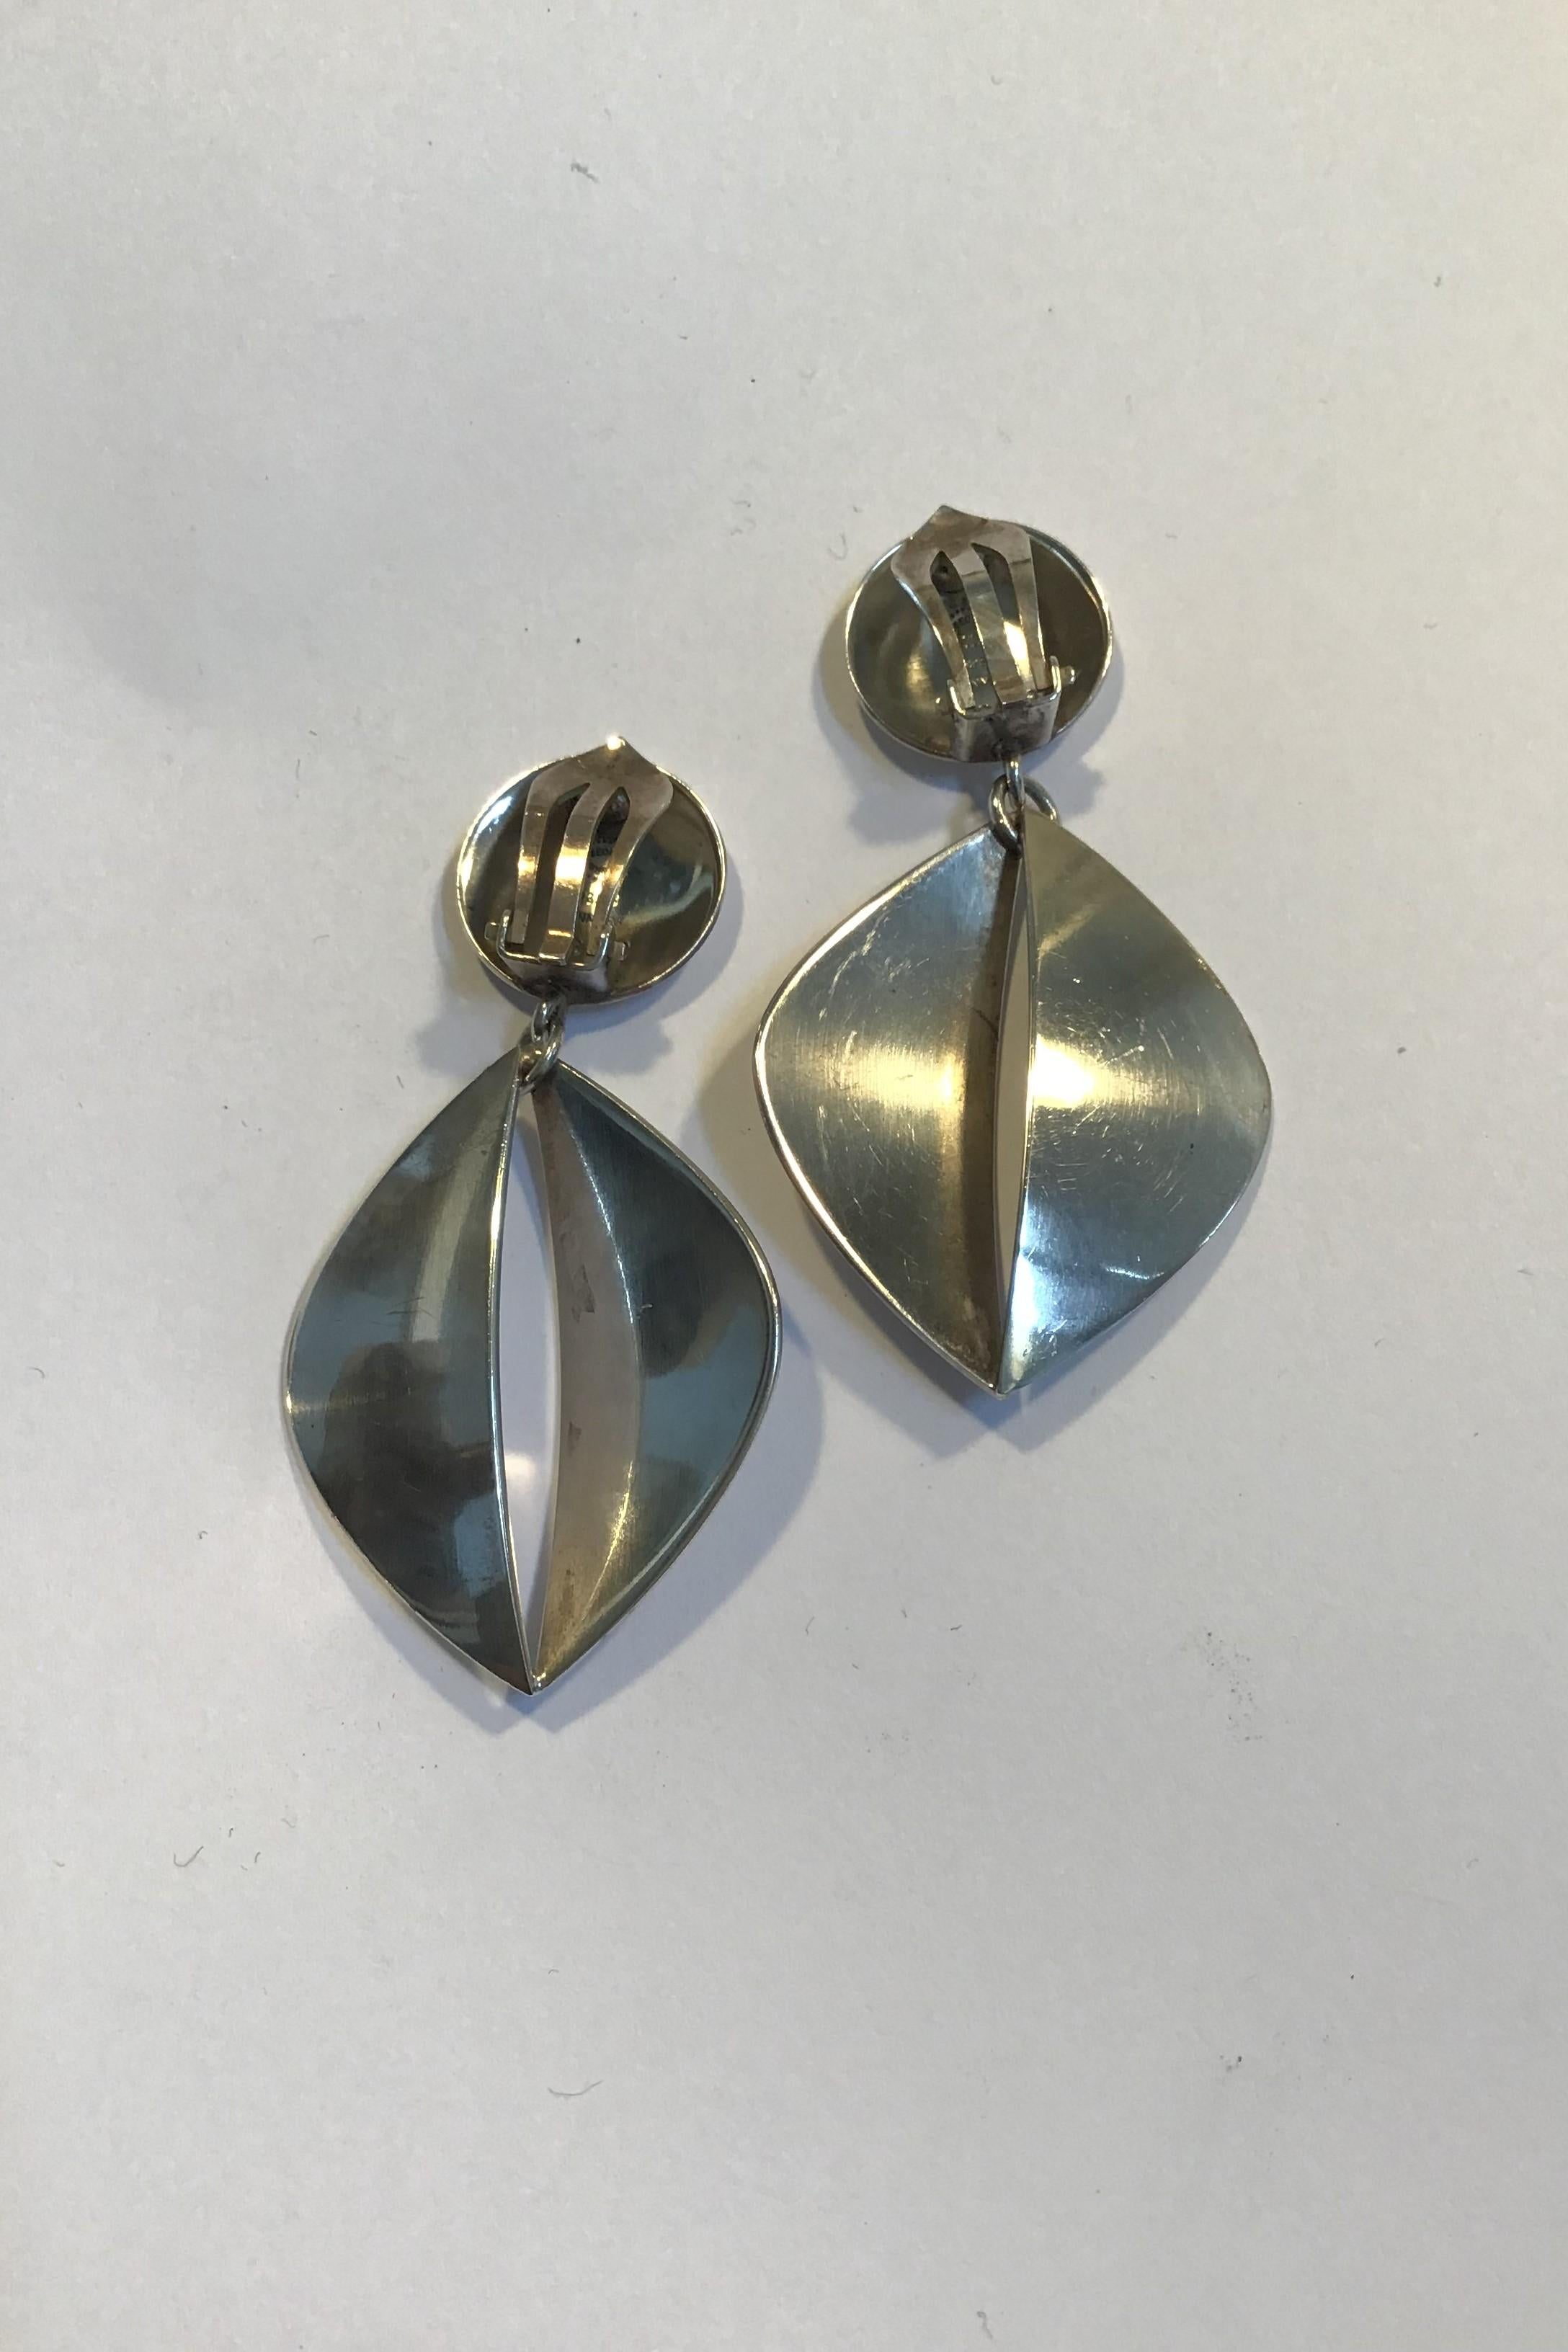 Georg Jensen Sterling Silver Ear Clips No 380B Measures 6 cm(2.36 in) Combined weight 16.8 gr (0.59 oz)
